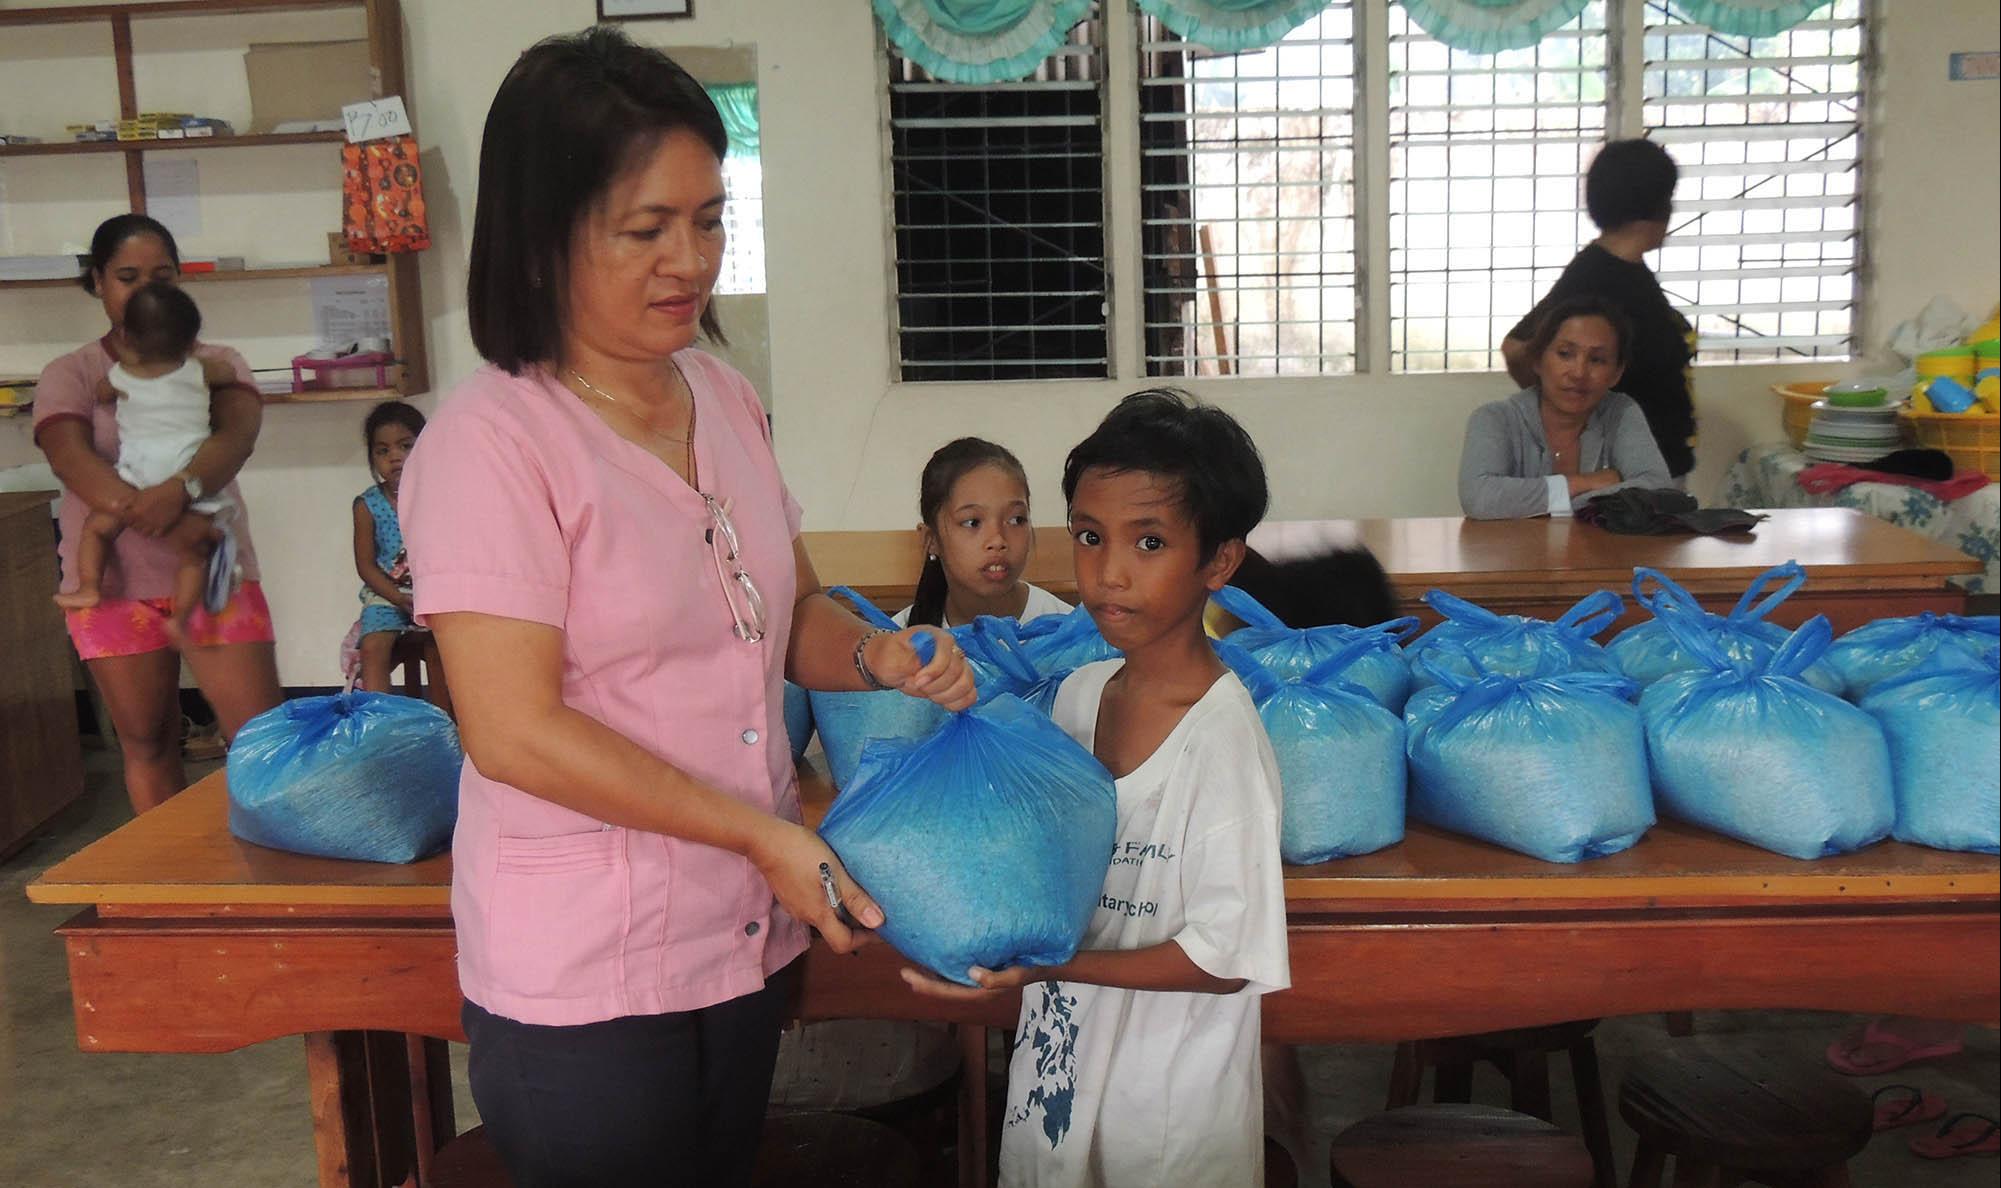 San Roque Elementary School – Christmas - Educational Project of the Child & Family Foundation